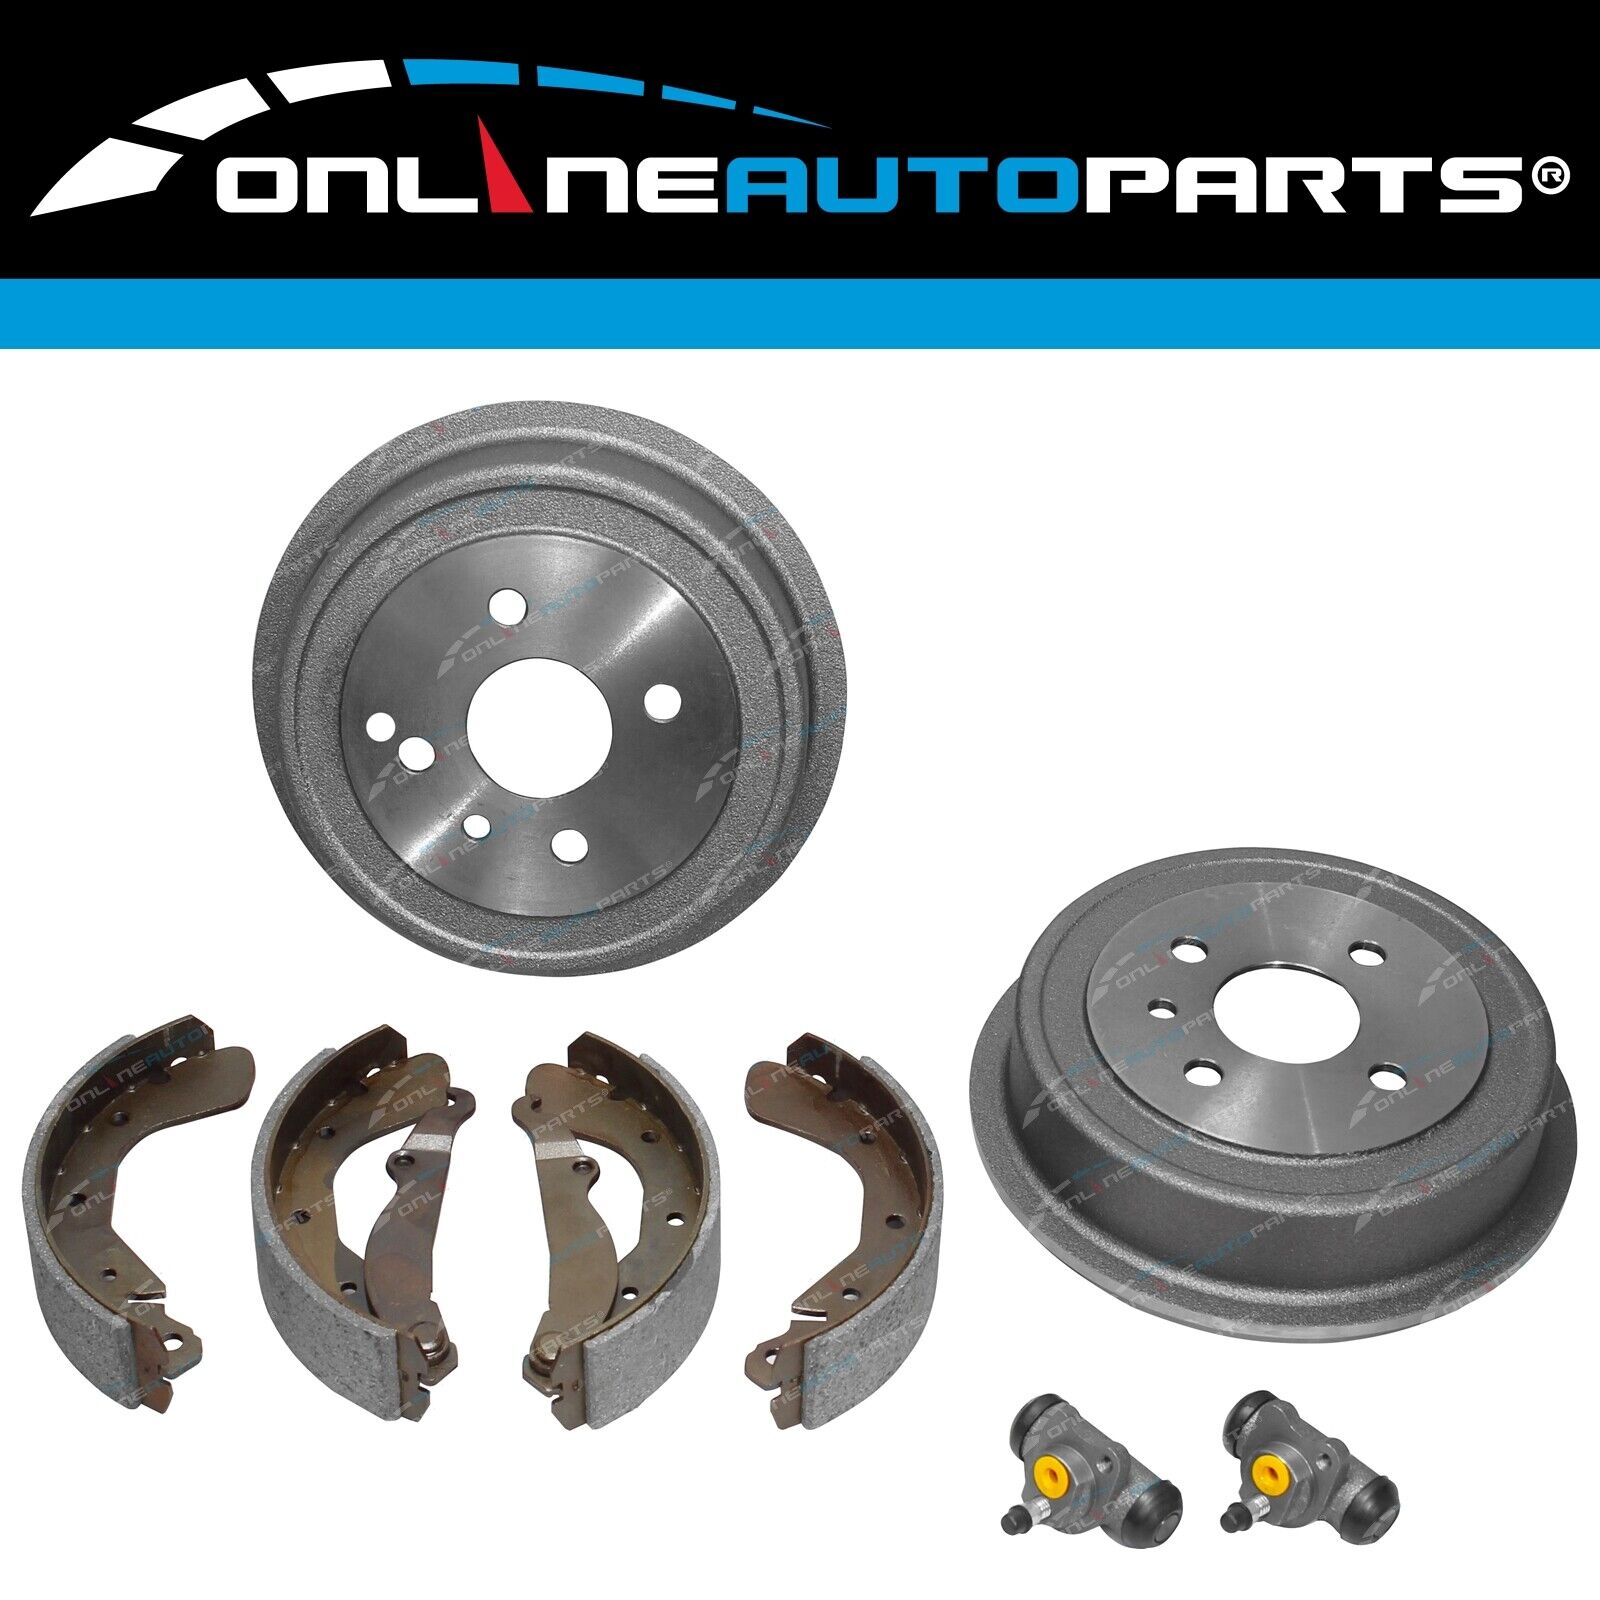 Rear Drum Brakes, Shoes & Wheel Cylinders Kit for Daewoo Cielo 1.5I 1995~1997